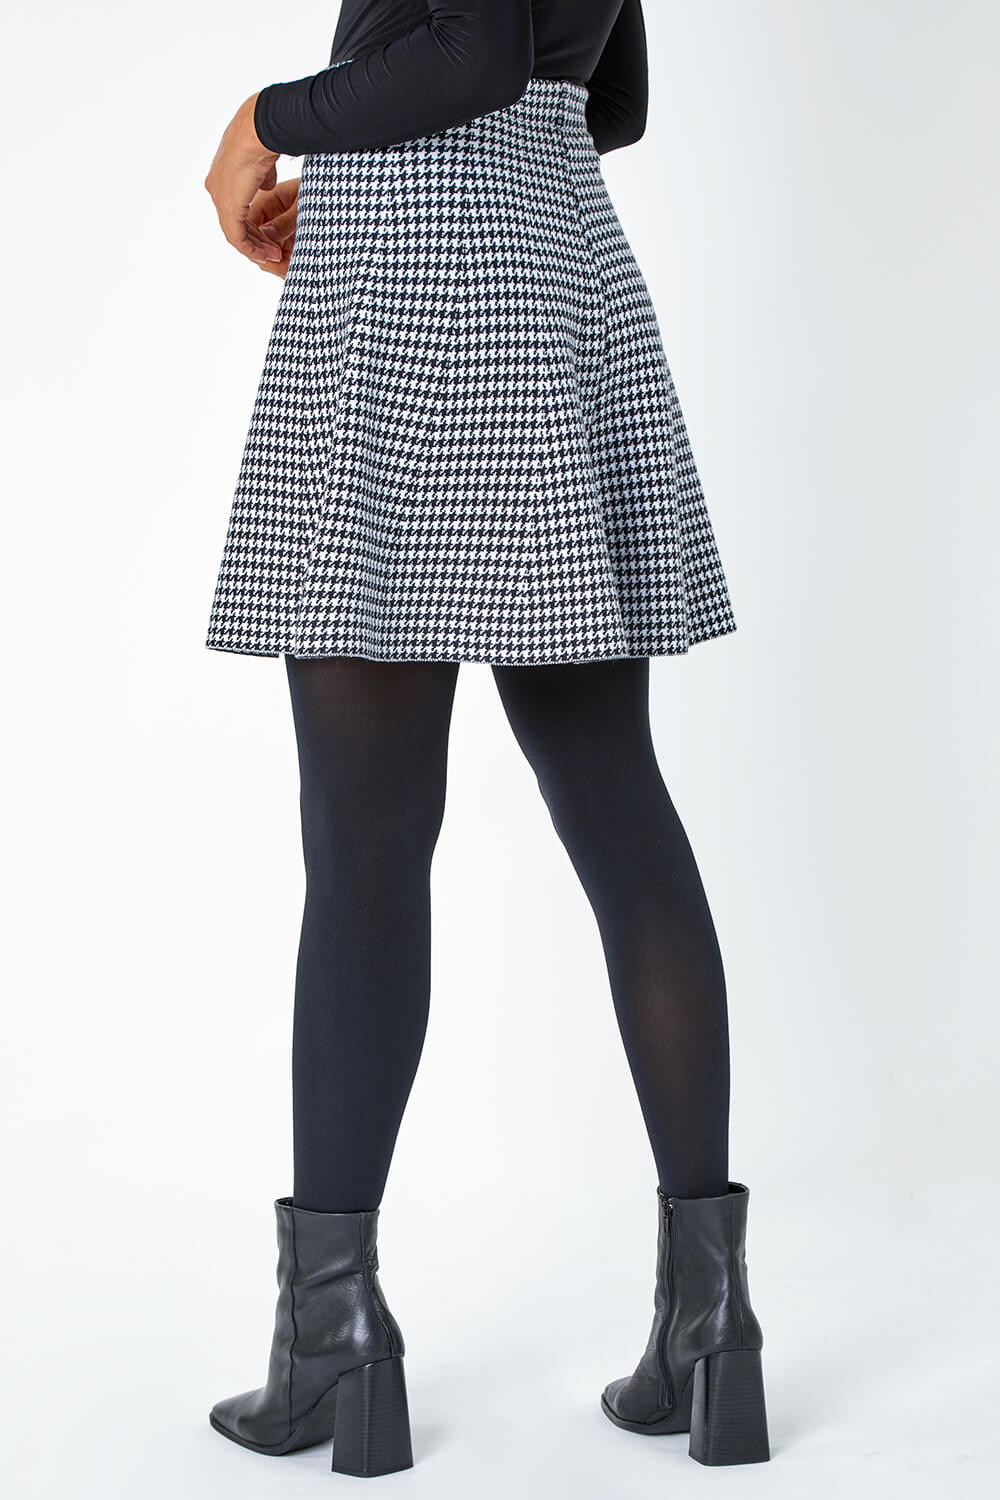 Black Dogstooth Knitted A-Line Mini Skirt, Image 3 of 5